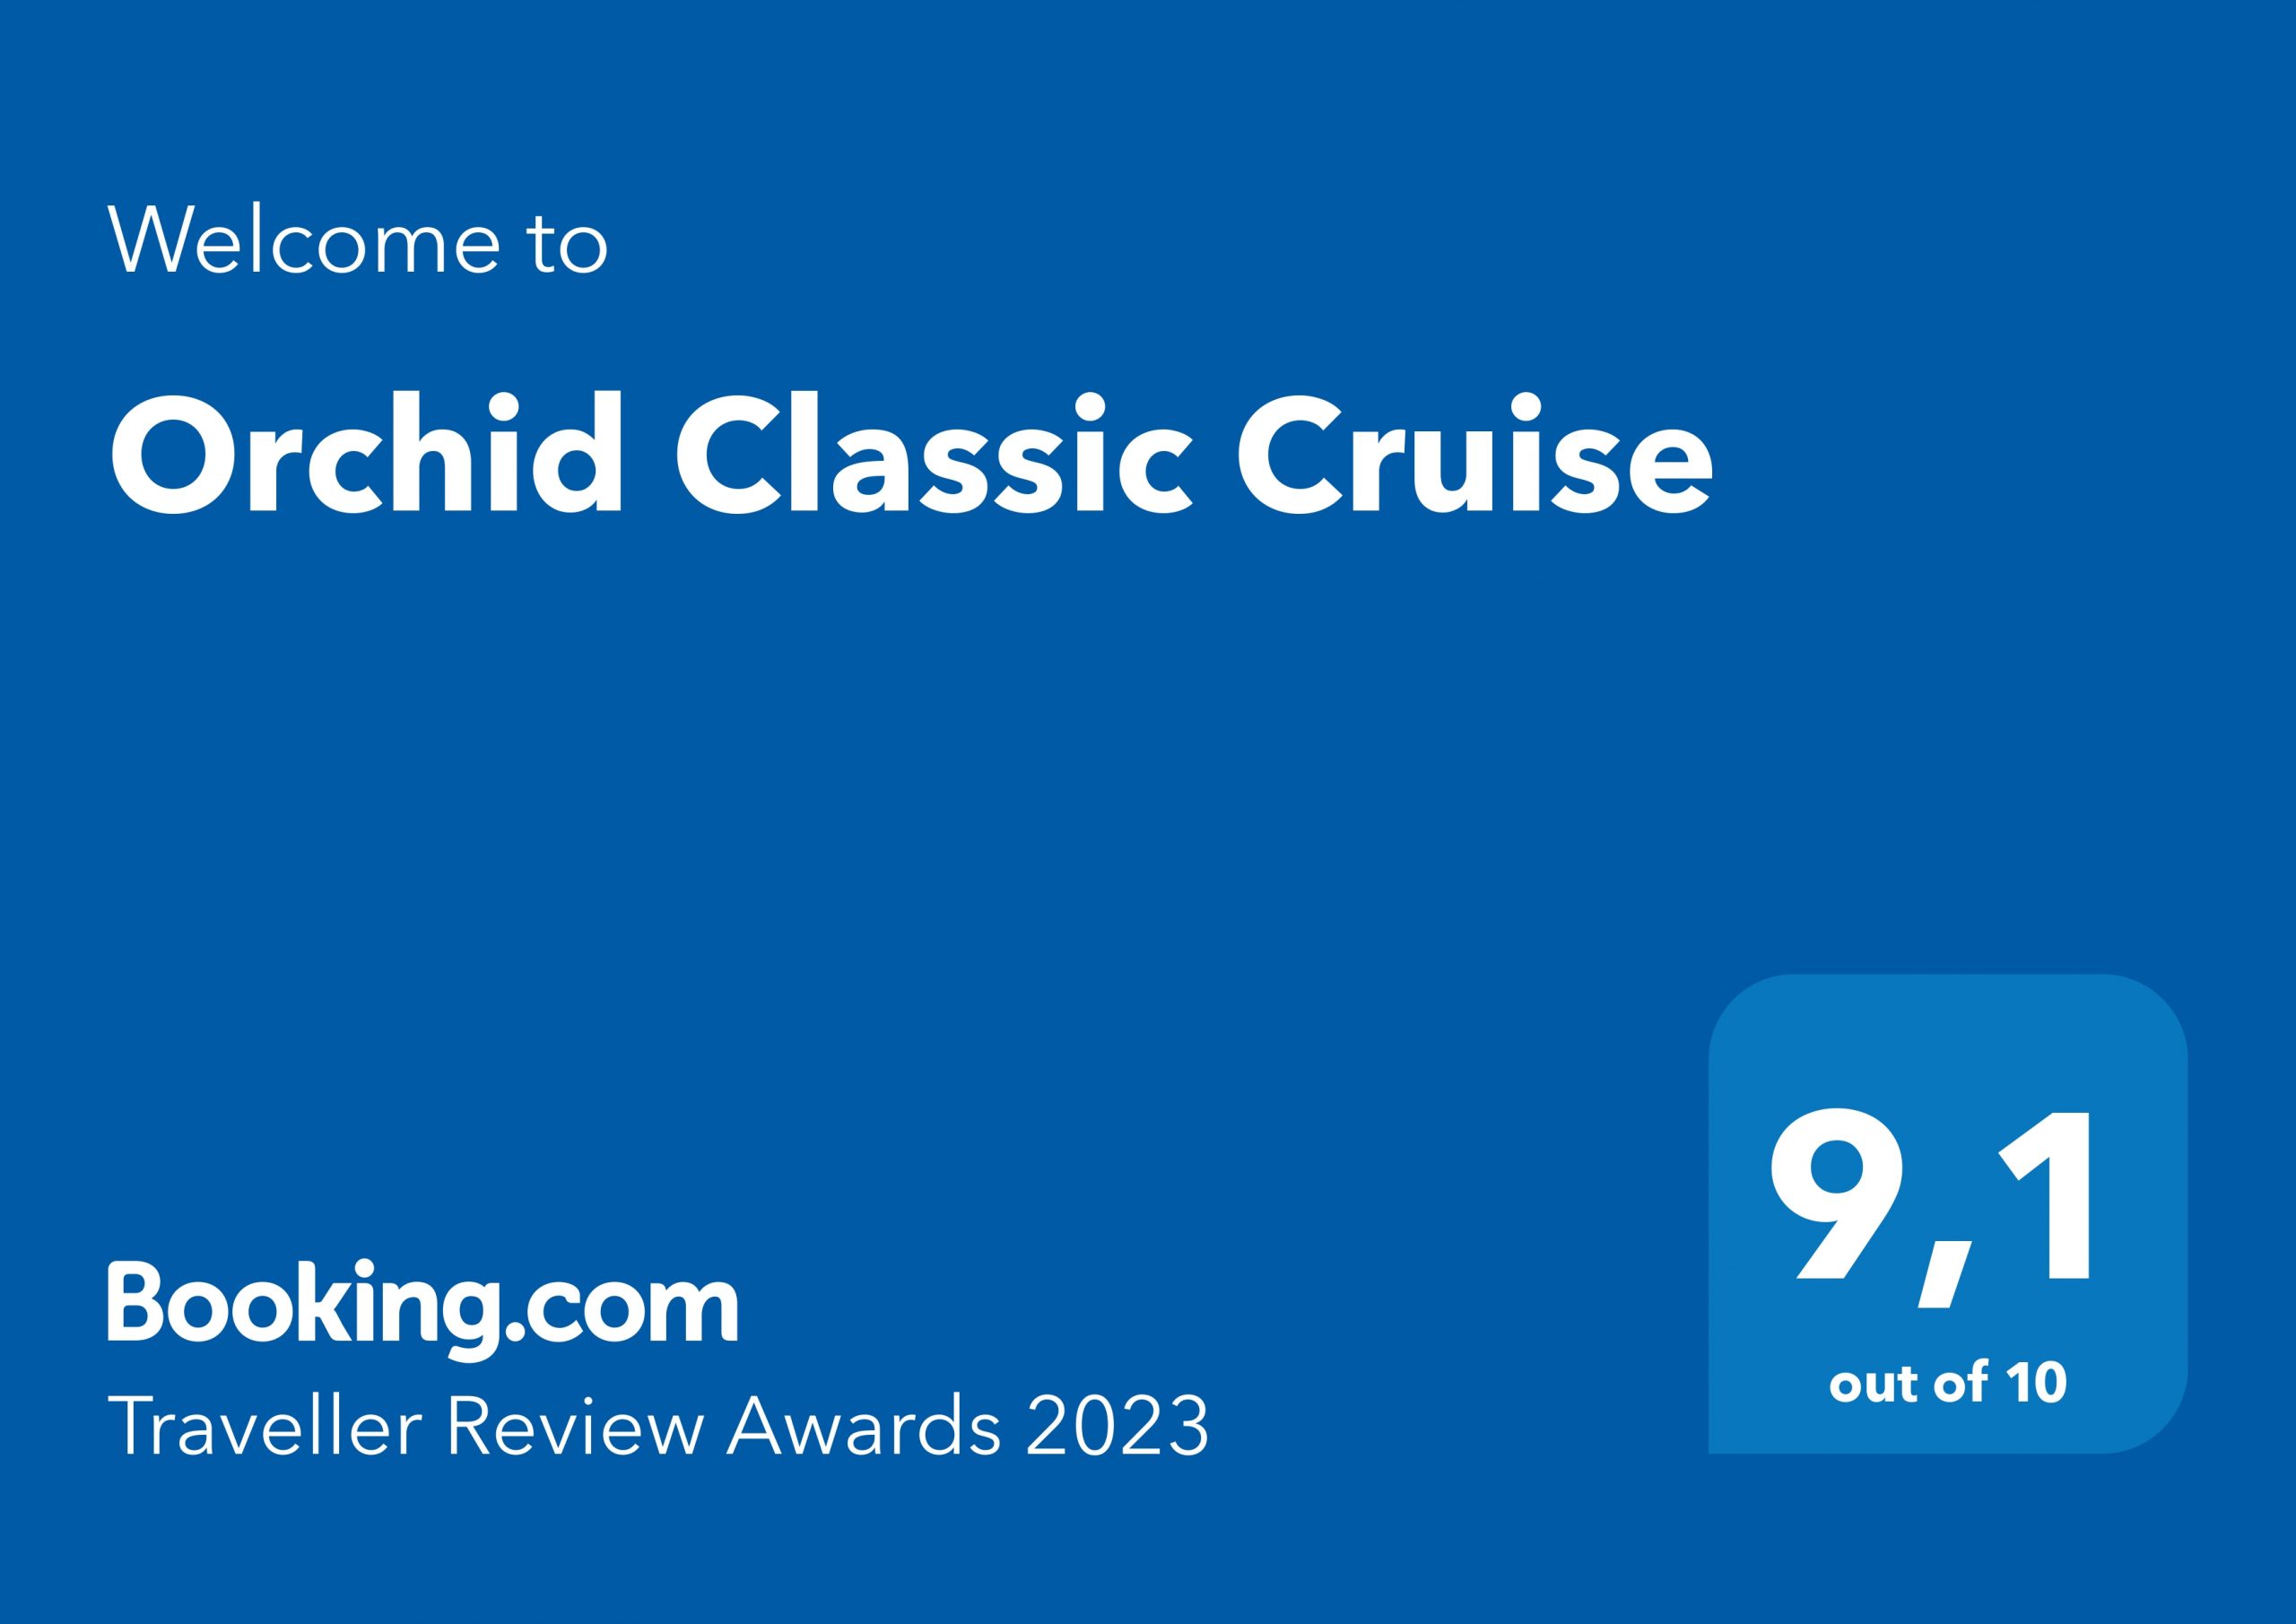 Orchid Cruises won Booking.com’s 2023 Traveller Review Award